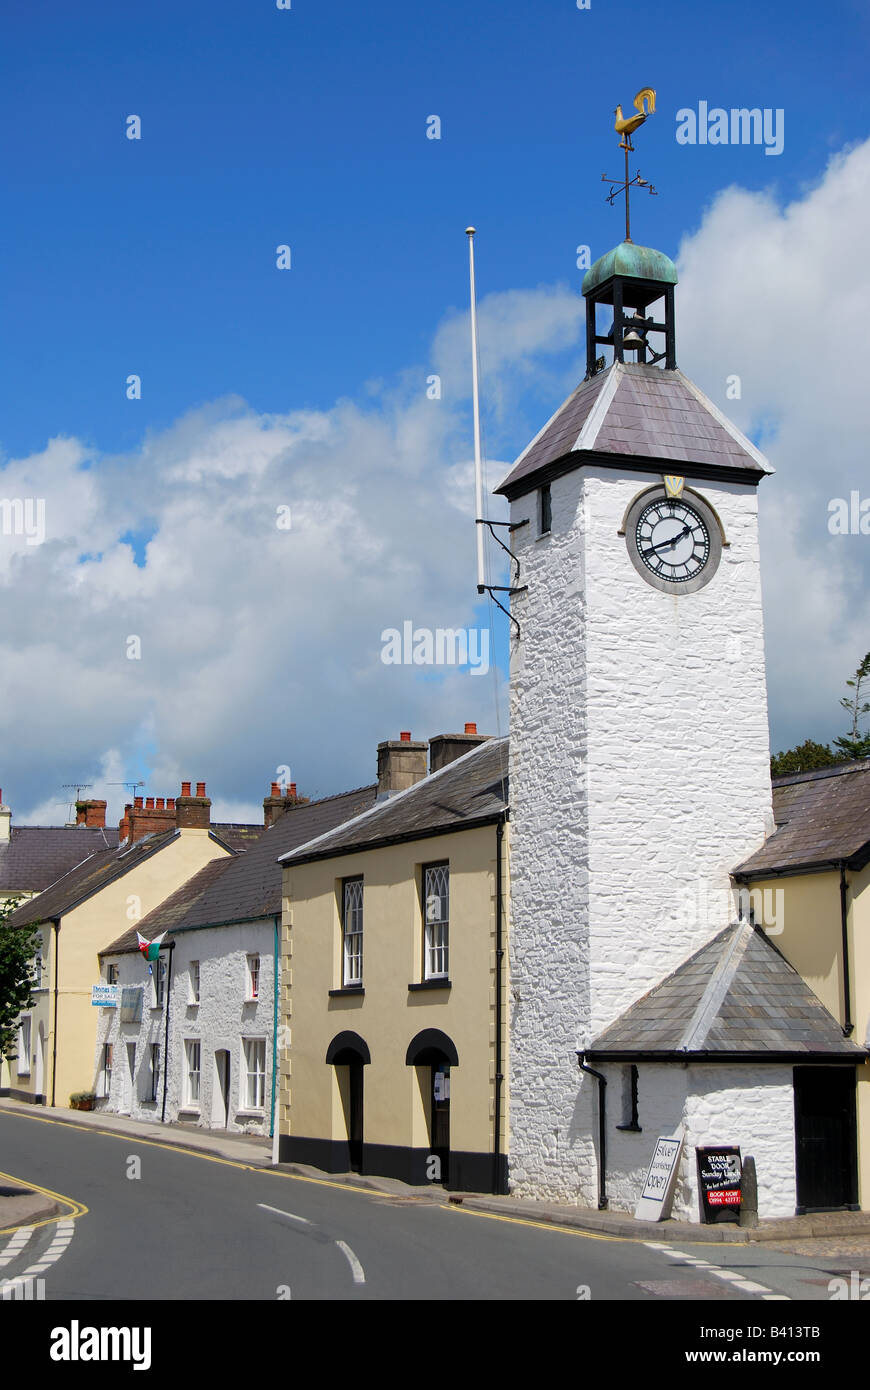 Clock Tower, King Street, Laugharne, Carmarthenshire, Wales, Regno Unito Foto Stock